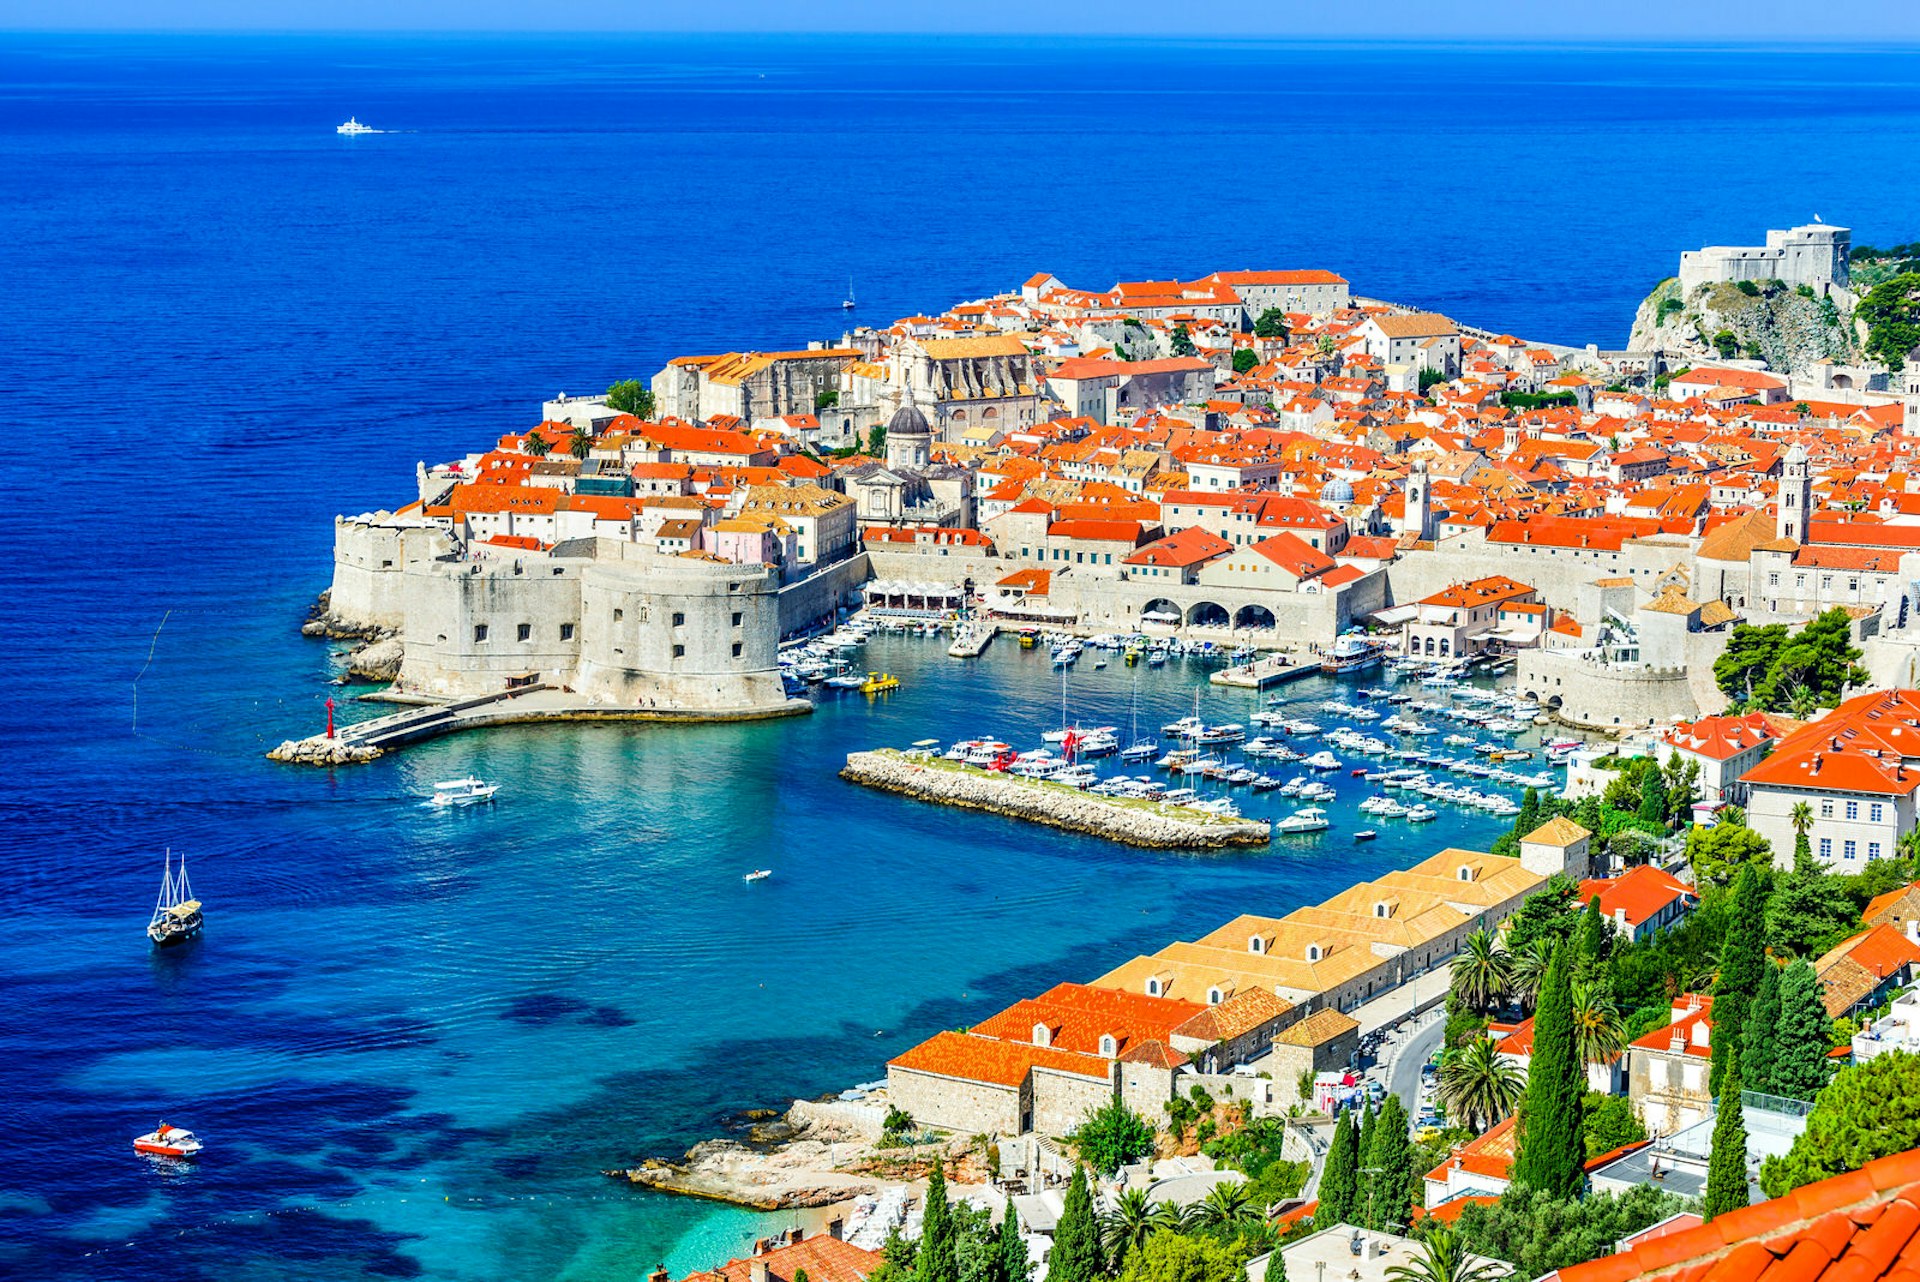 Dubrovnik's beautiful old town